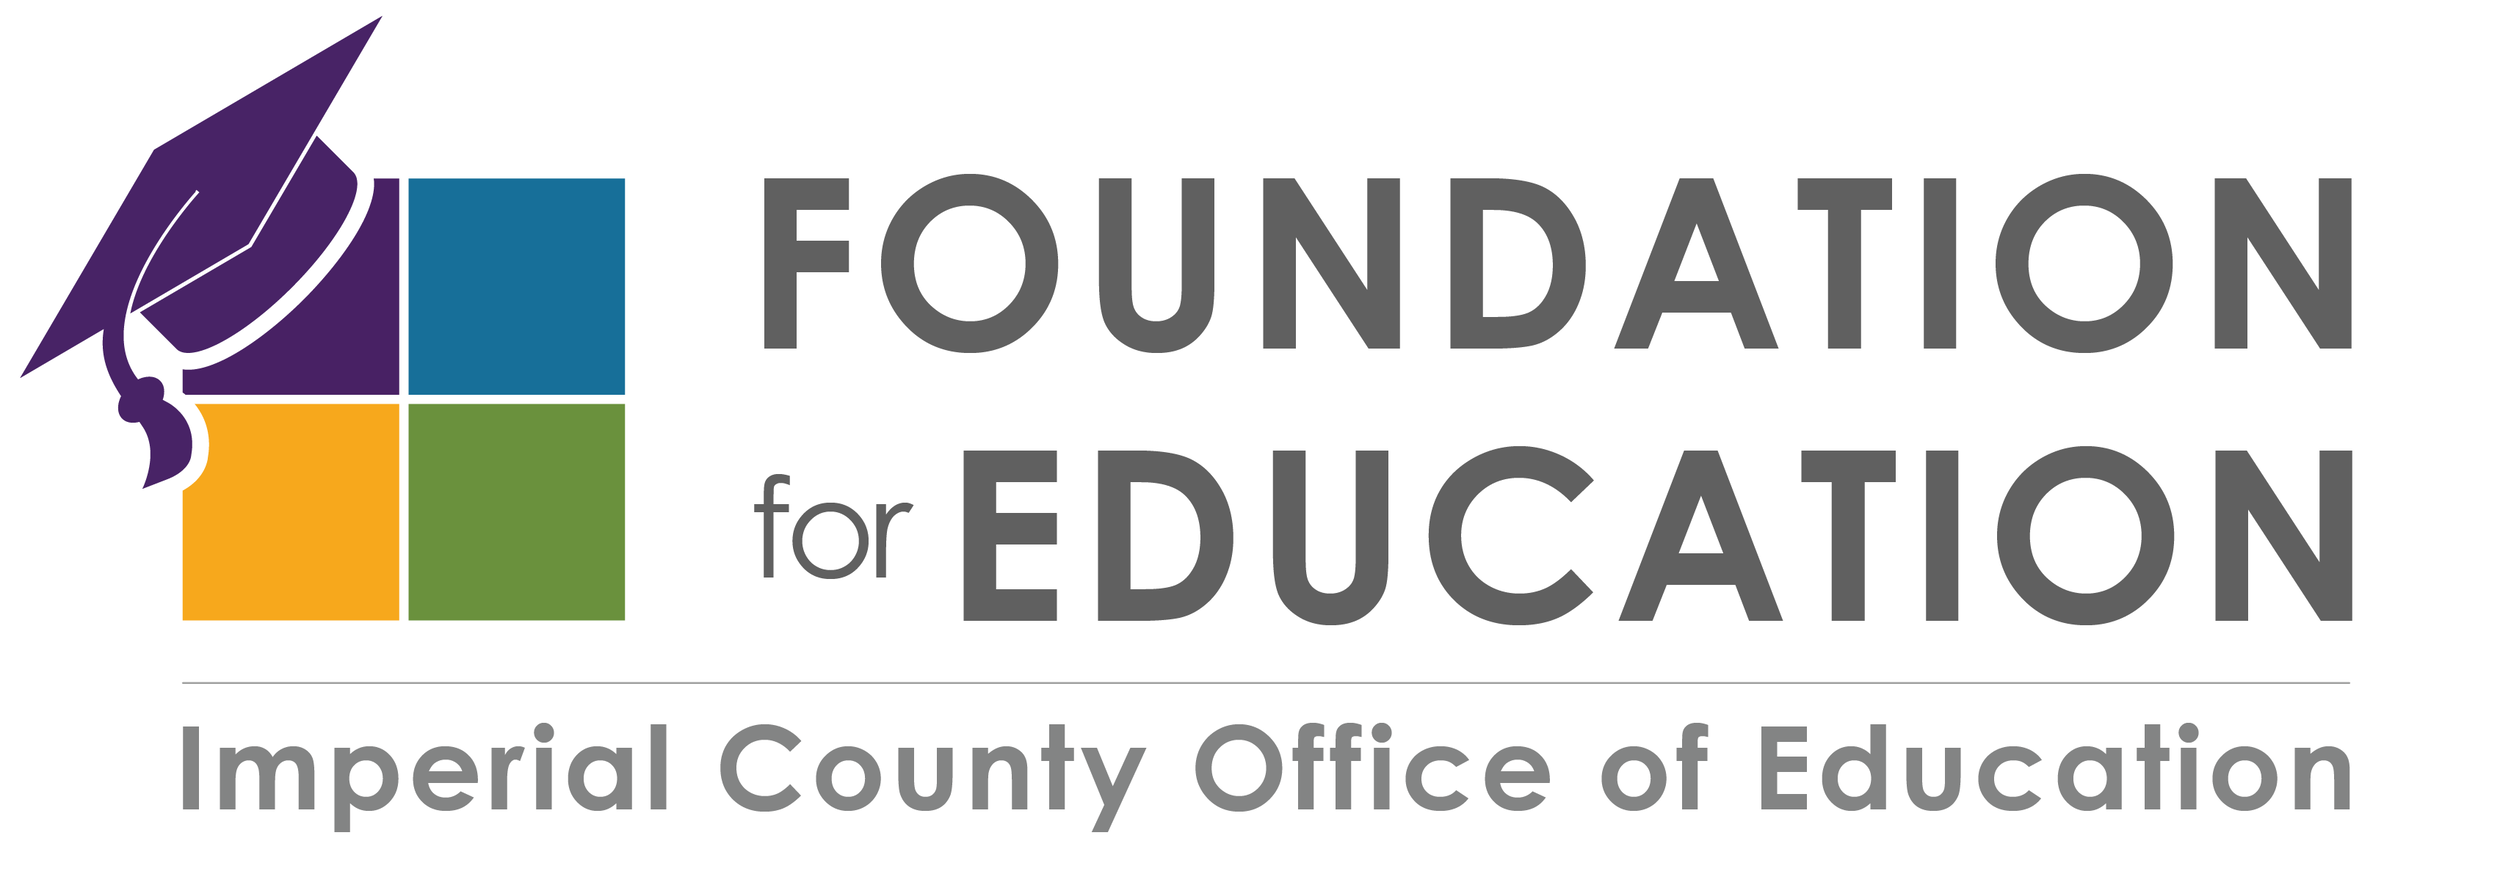 Foundation for Education